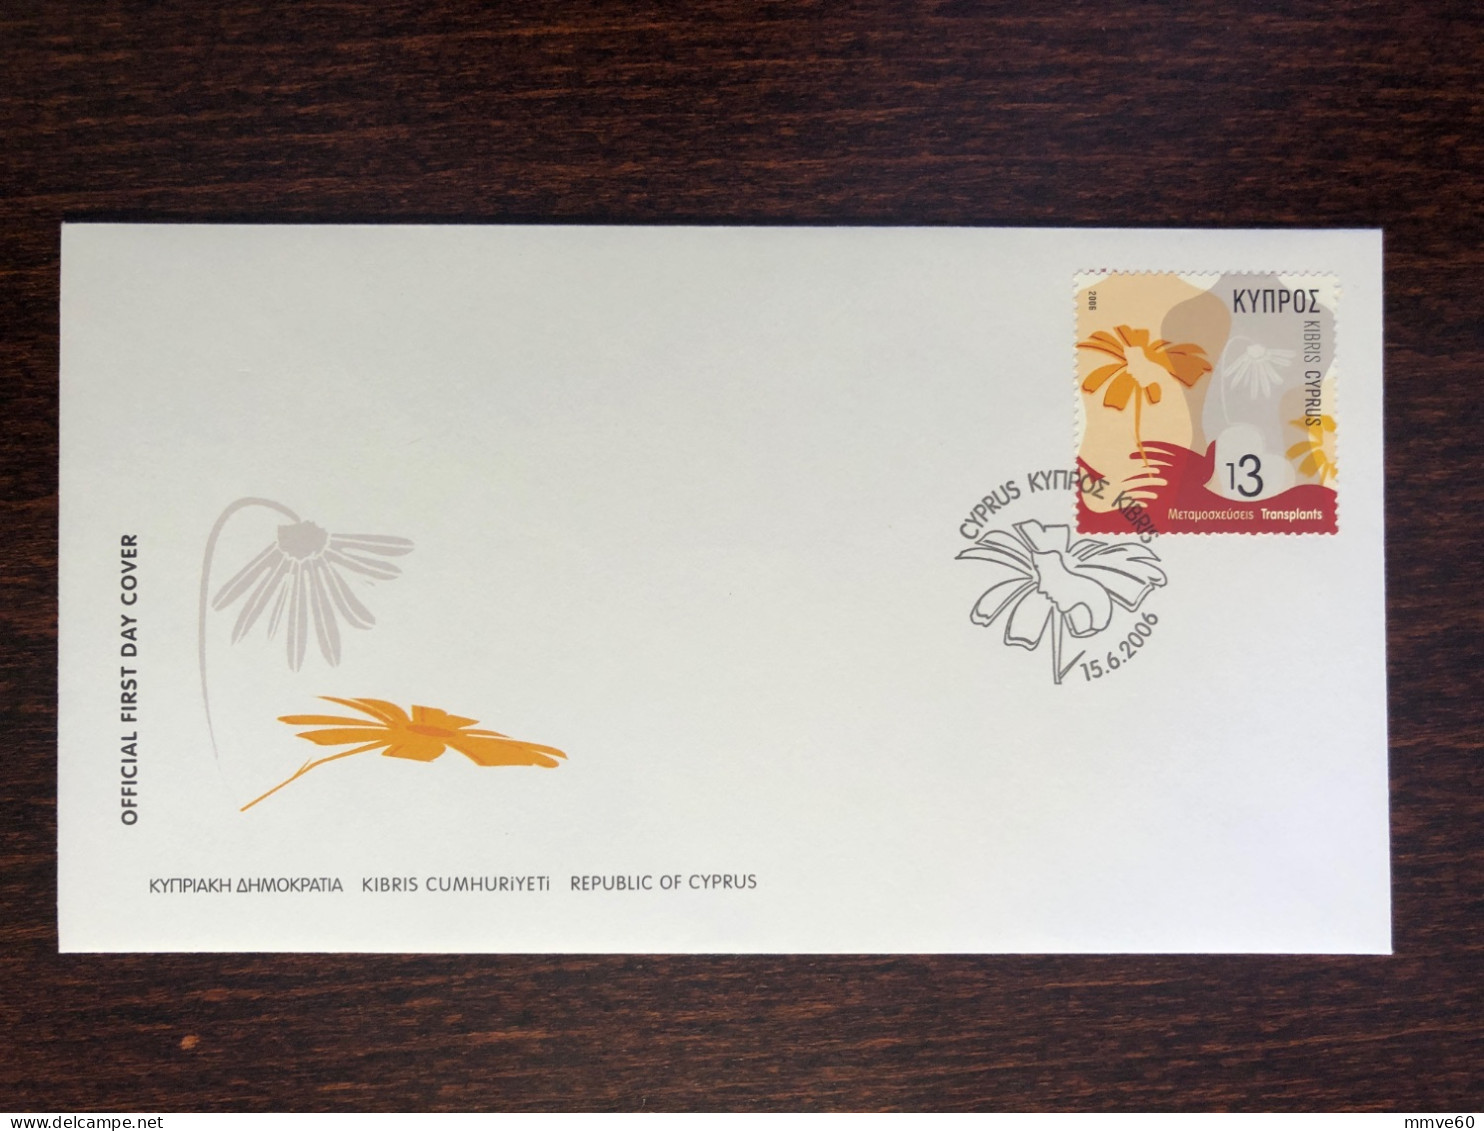 CYPRUS FDC COVER 2006 YEAR ORGAN DONATION TRANSPLANTATION HEALTH MEDICINE STAMPS - Covers & Documents